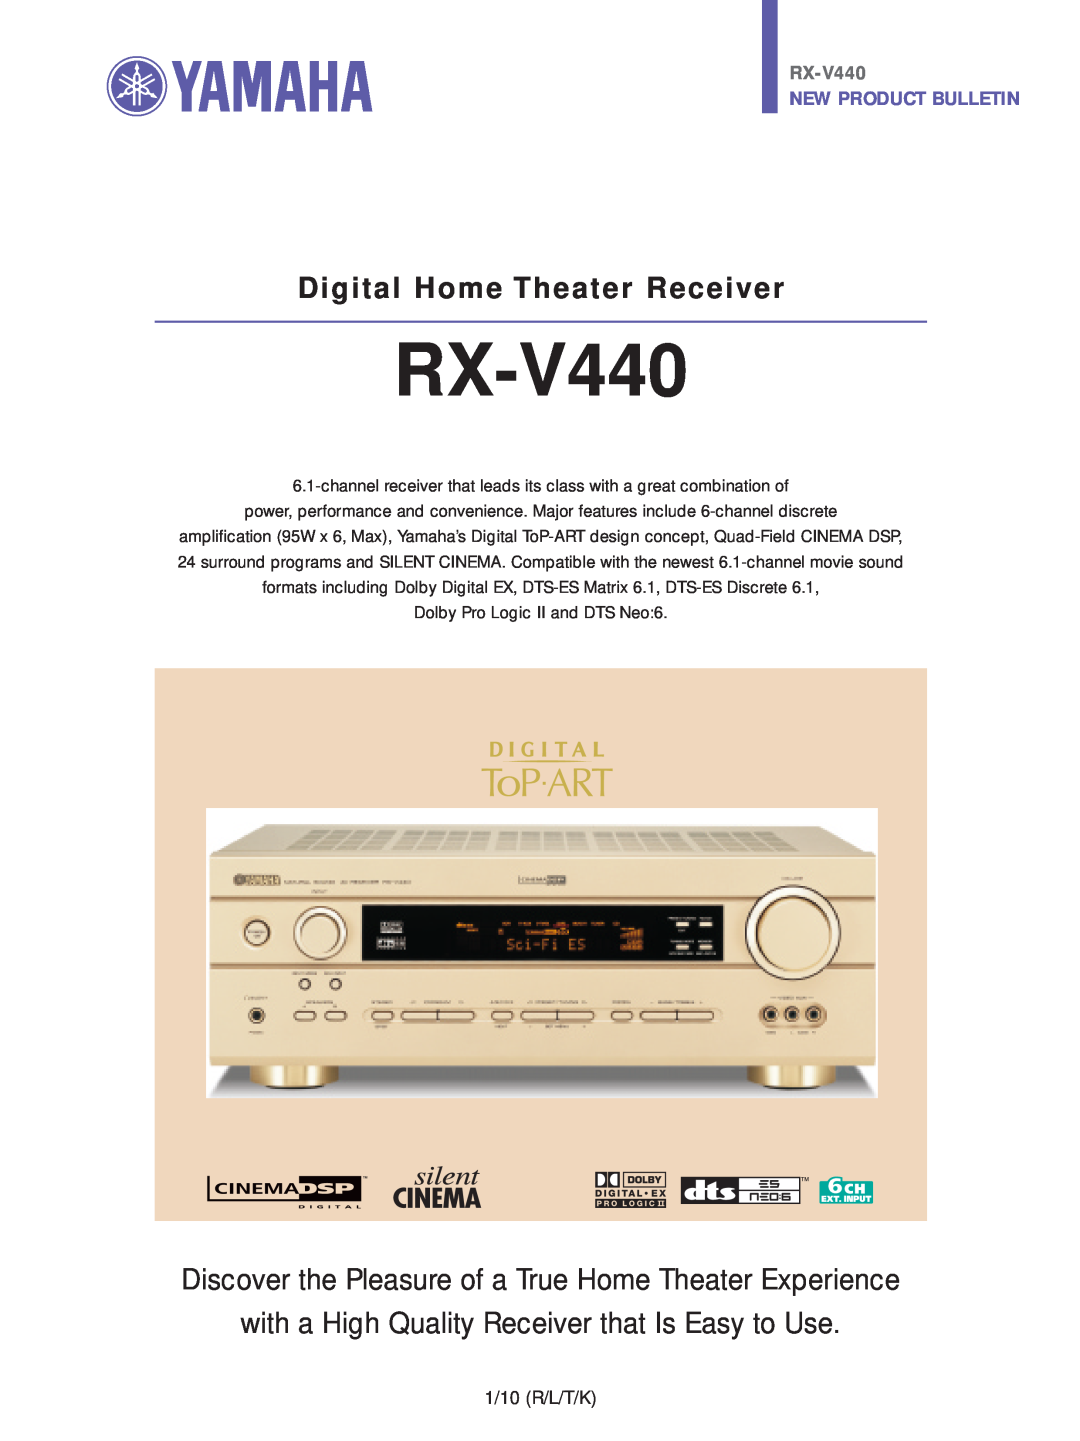 Yamaha RX-V440 manual with a High Quality Receiver that Is Easy to Use, New Product Bulletin 